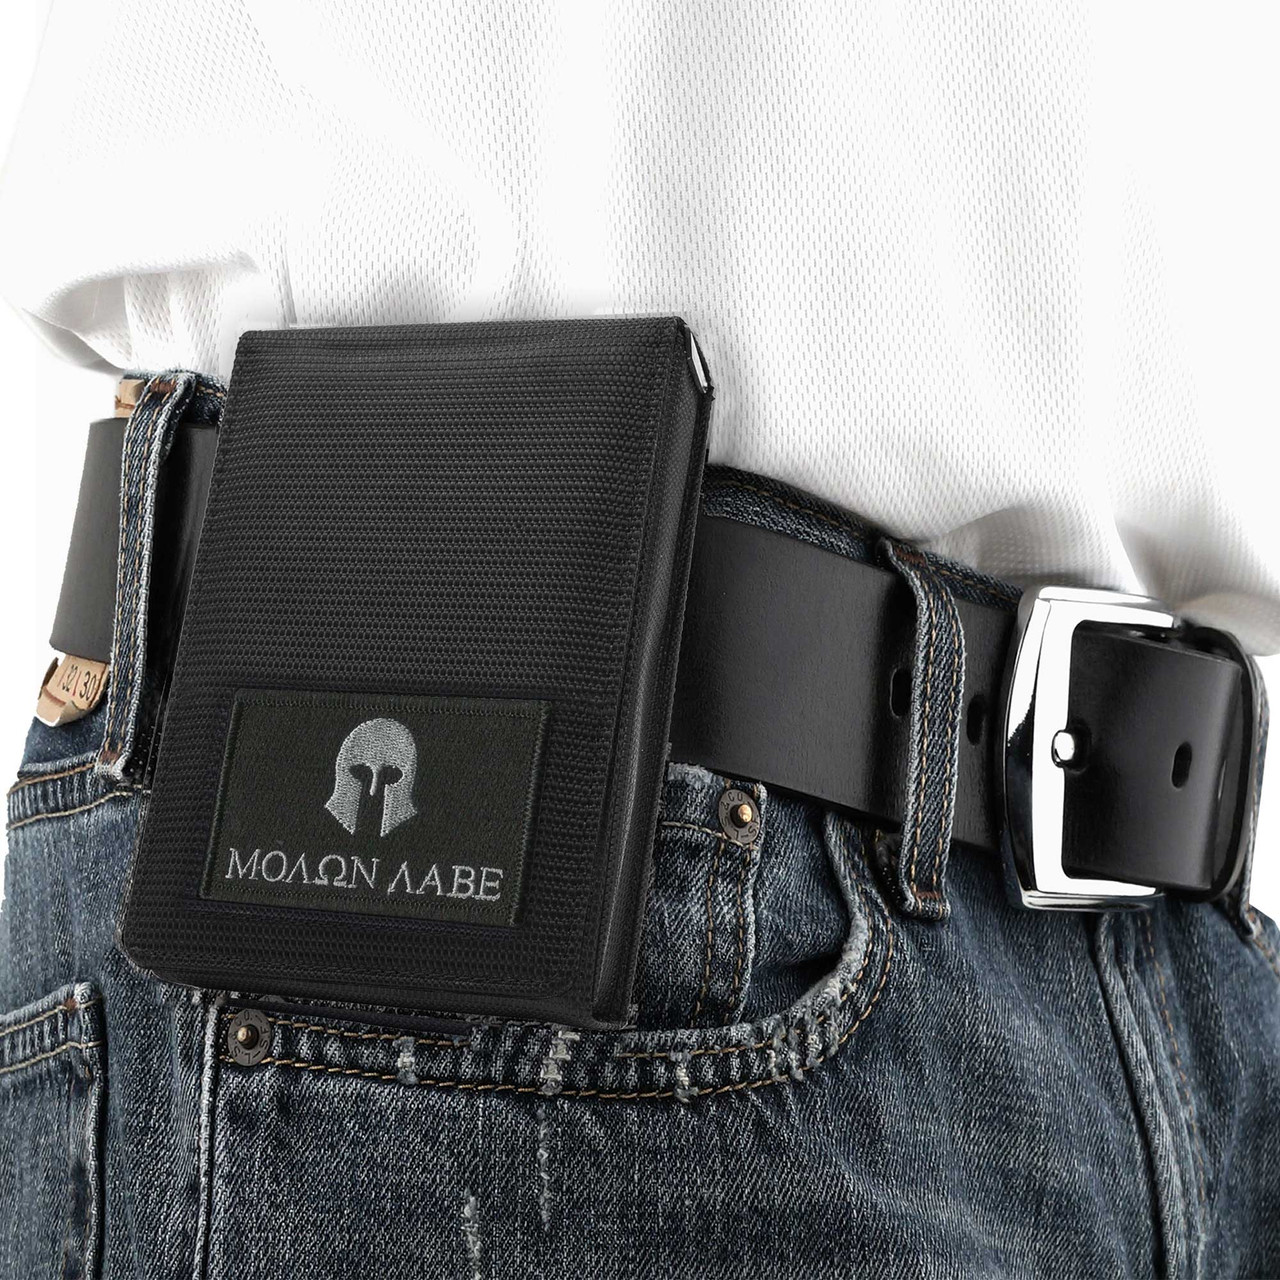 Springfield Ultra Compact Molon Labe Holster